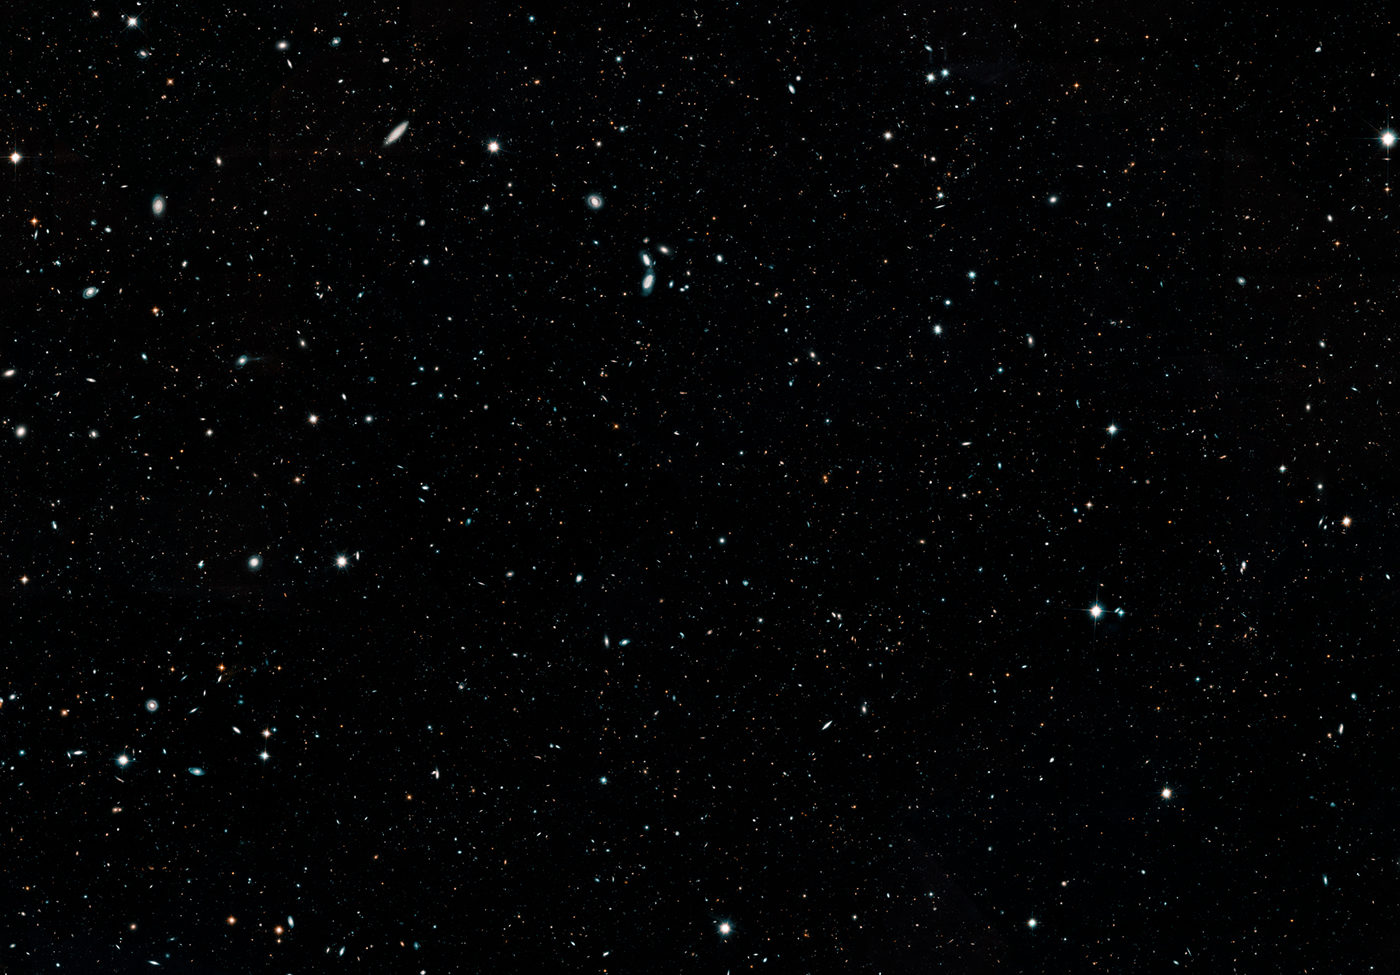 A portion of ESA and NASA's Hubble Legacy Field image, which includes observations taken by several Hubble deep-field surveys, including the eXtreme Deep Field (XDF). NASA, ESA, G. Illingworth and D. Magee (University of California, Santa Cruz), K. Whitaker (University of Connecticut), R. Bouwens (Leiden University), P. Oesch (University of Geneva), and the Hubble Legacy Field team.